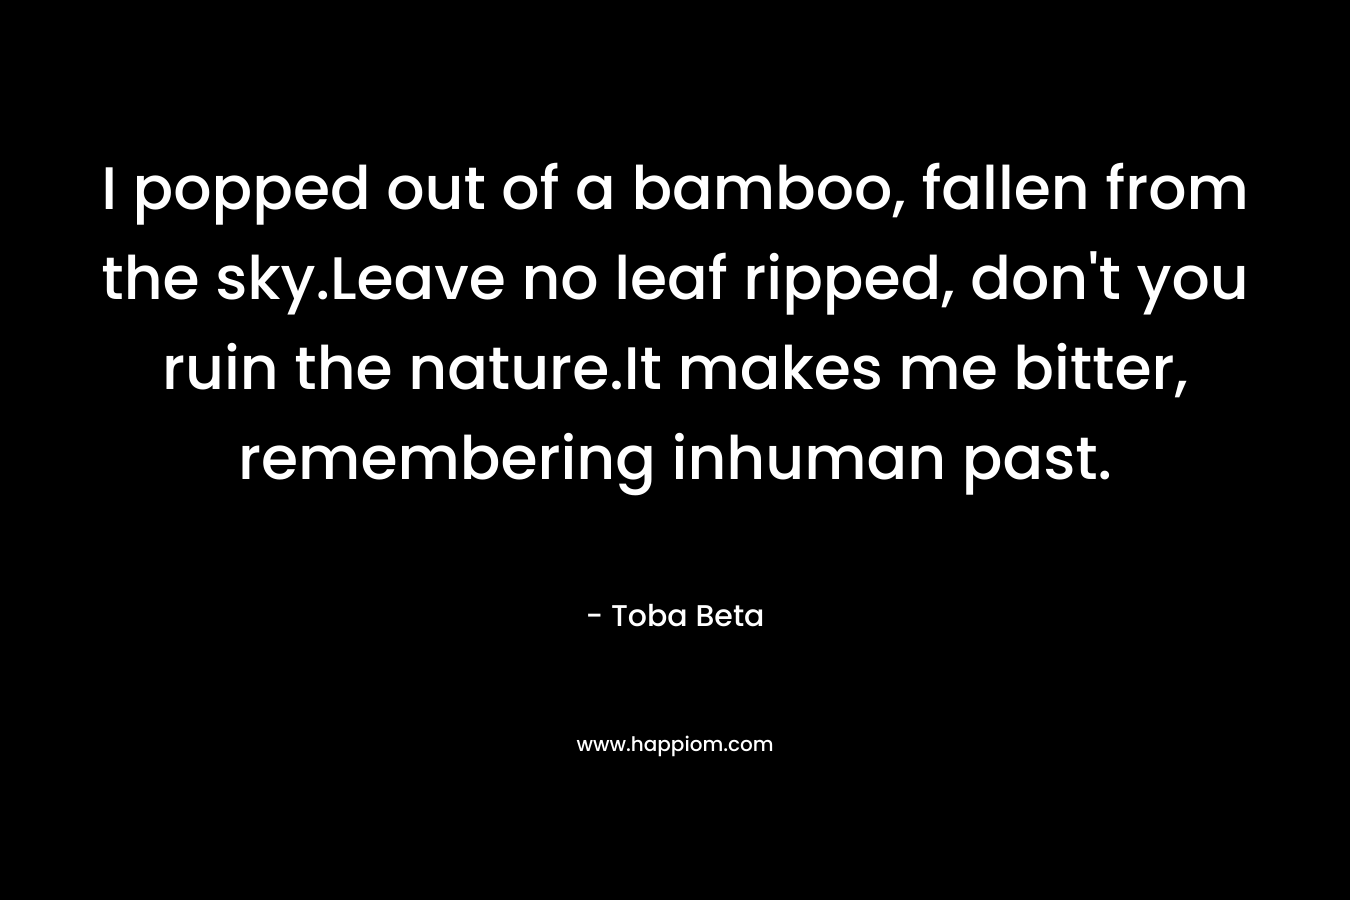 I popped out of a bamboo, fallen from the sky.Leave no leaf ripped, don't you ruin the nature.It makes me bitter, remembering inhuman past.